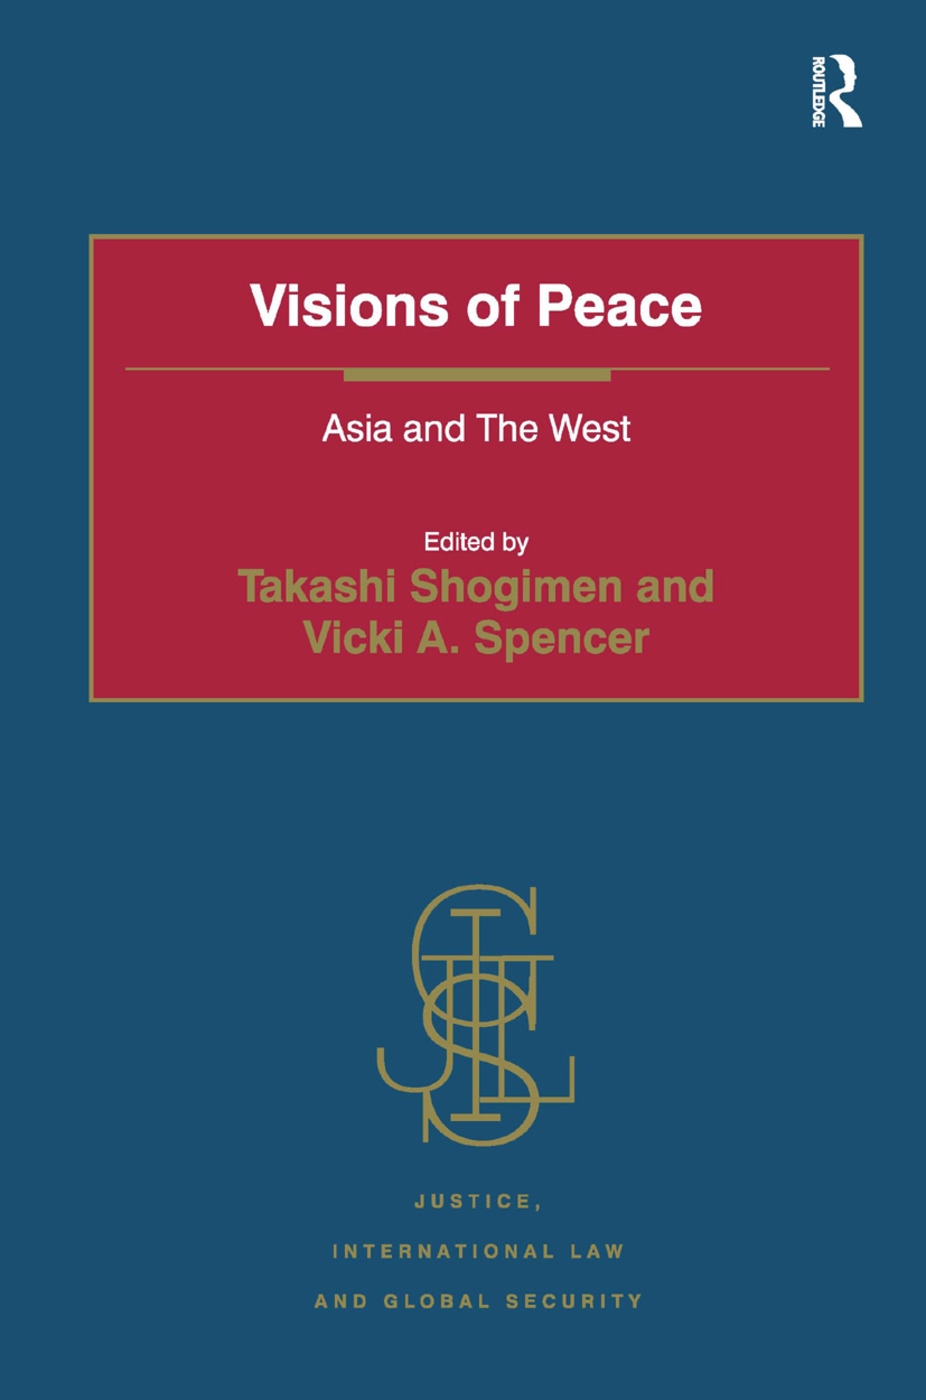 Visions of Peace: Asia and the West. by Takashi Shogimen and Vicki A. Spencer